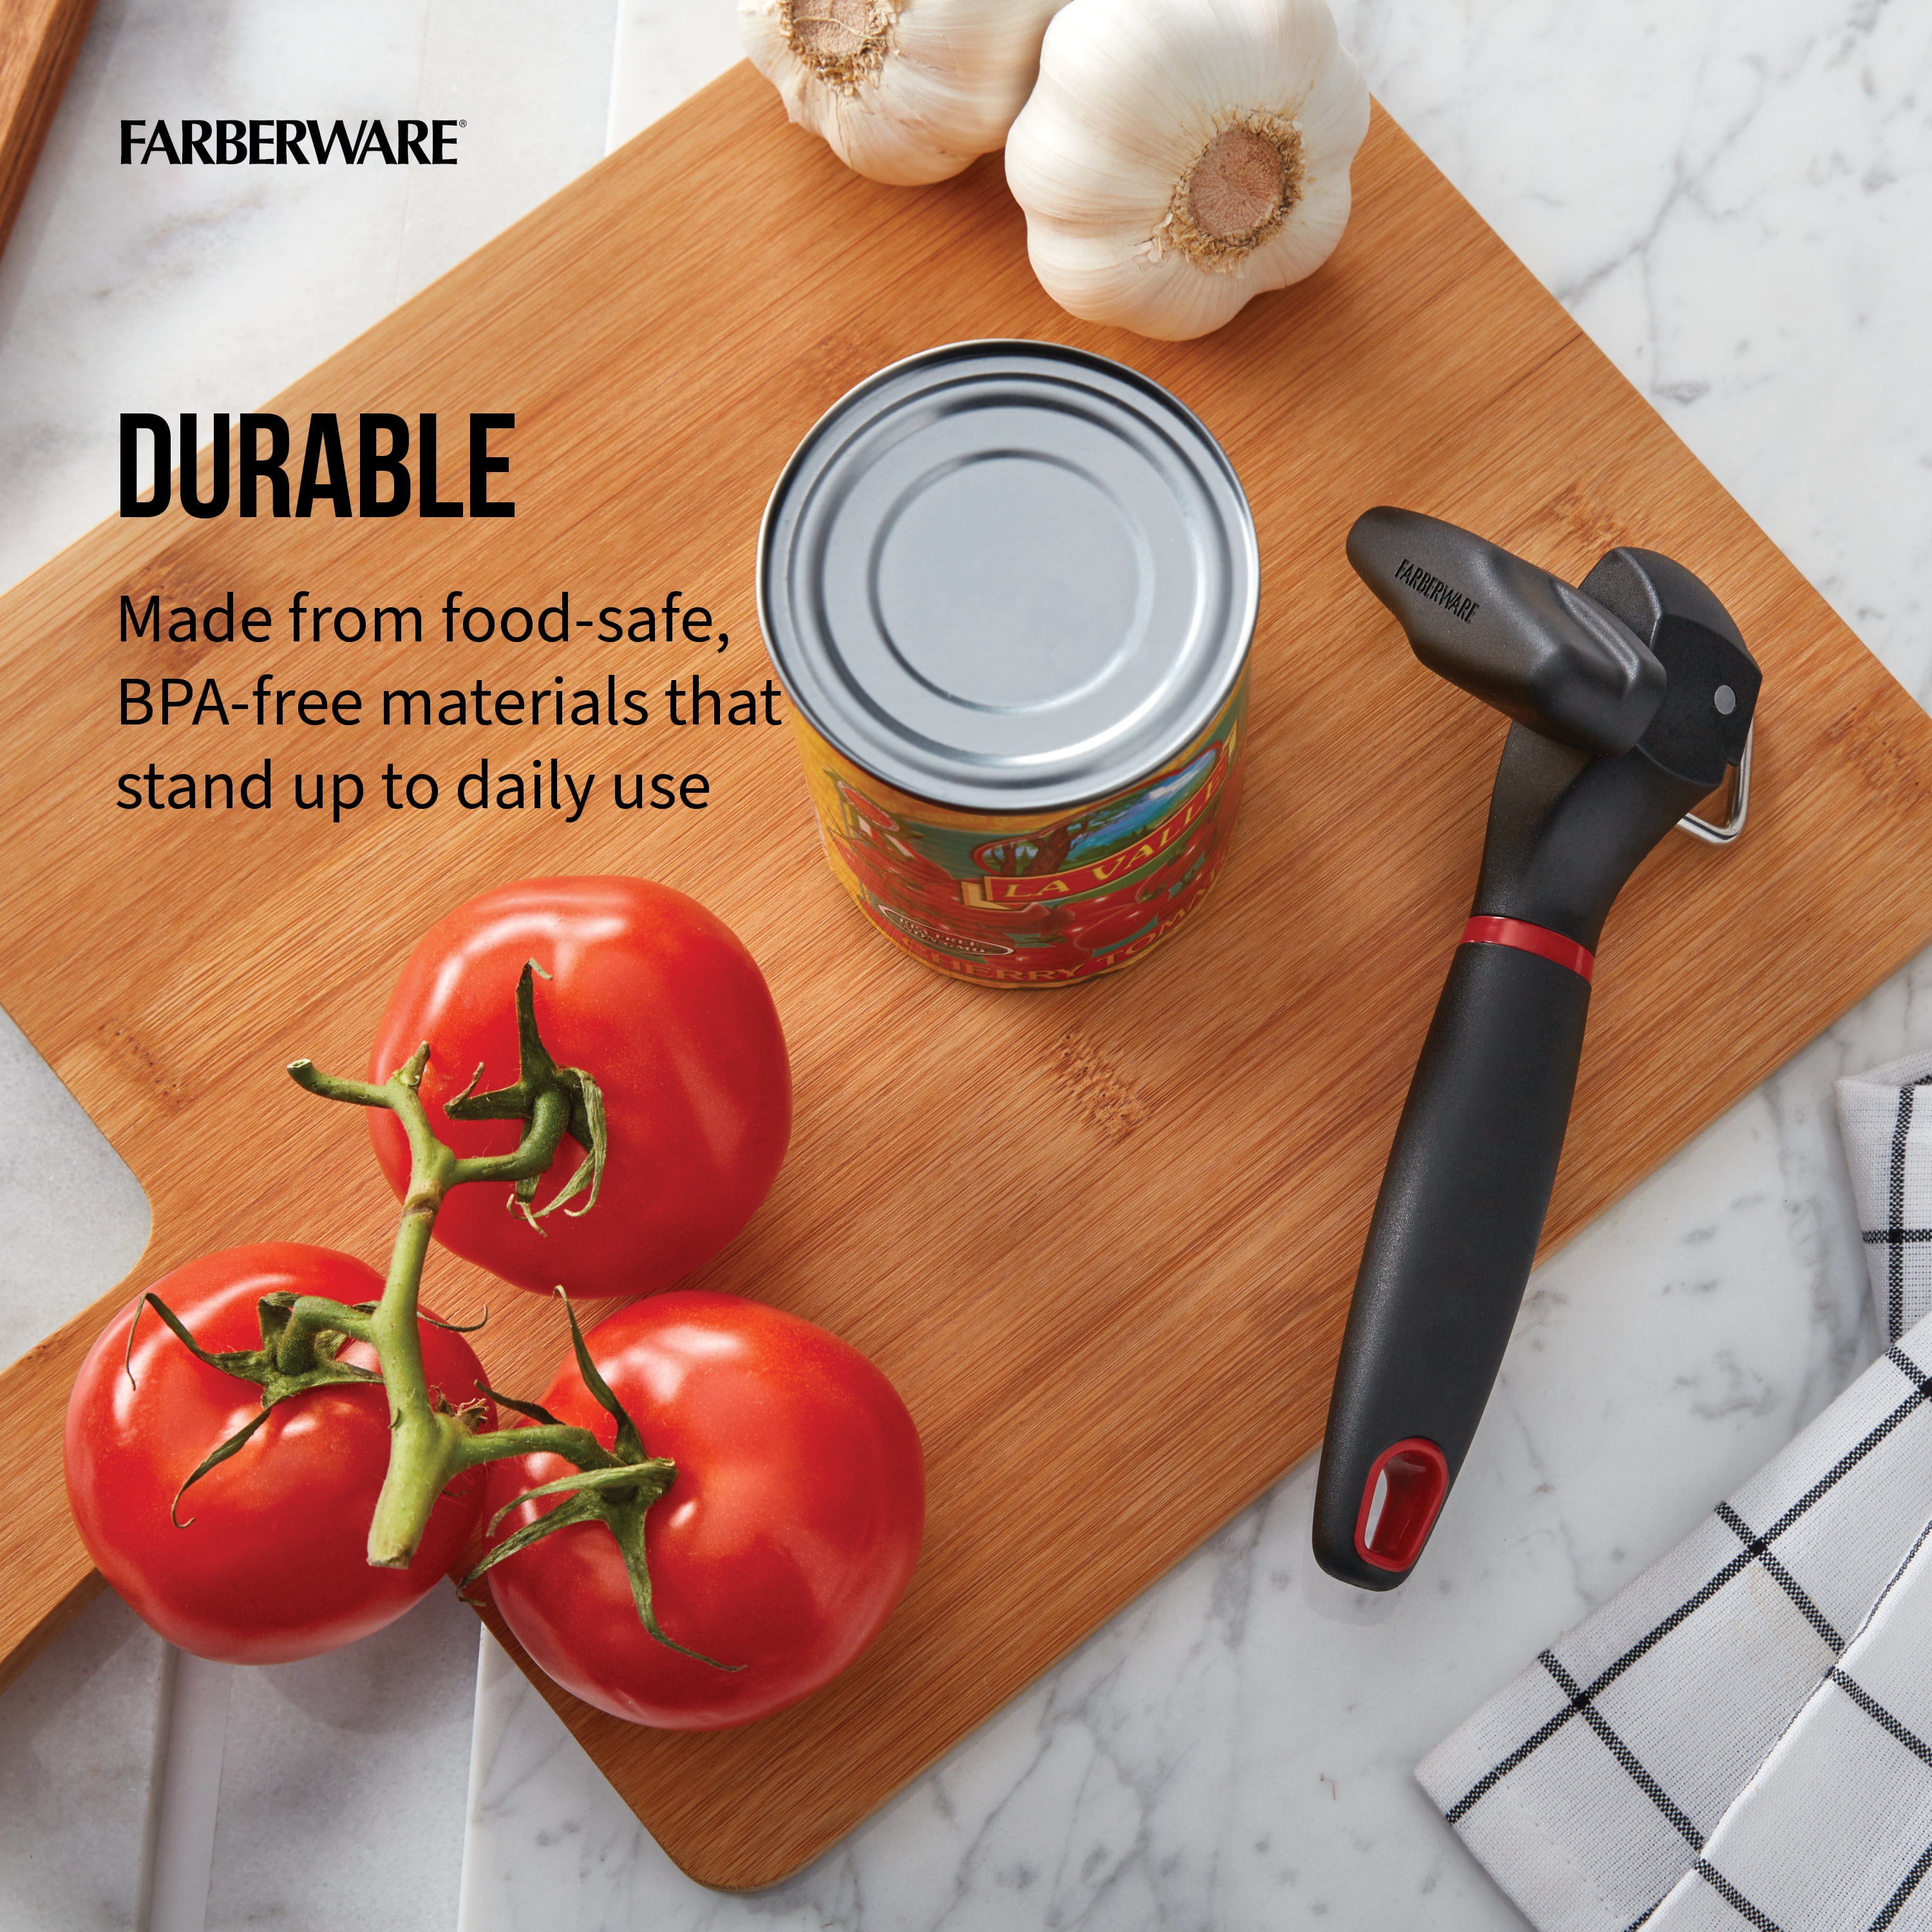  Farberware Professional Retro Heavy Duty Stainless Steel Smooth  Edge Manual Hand Held Can Opener With Soft Touch Handle, Rust Proof  Oversized Handheld Easy Turn Knob Blue : Home & Kitchen